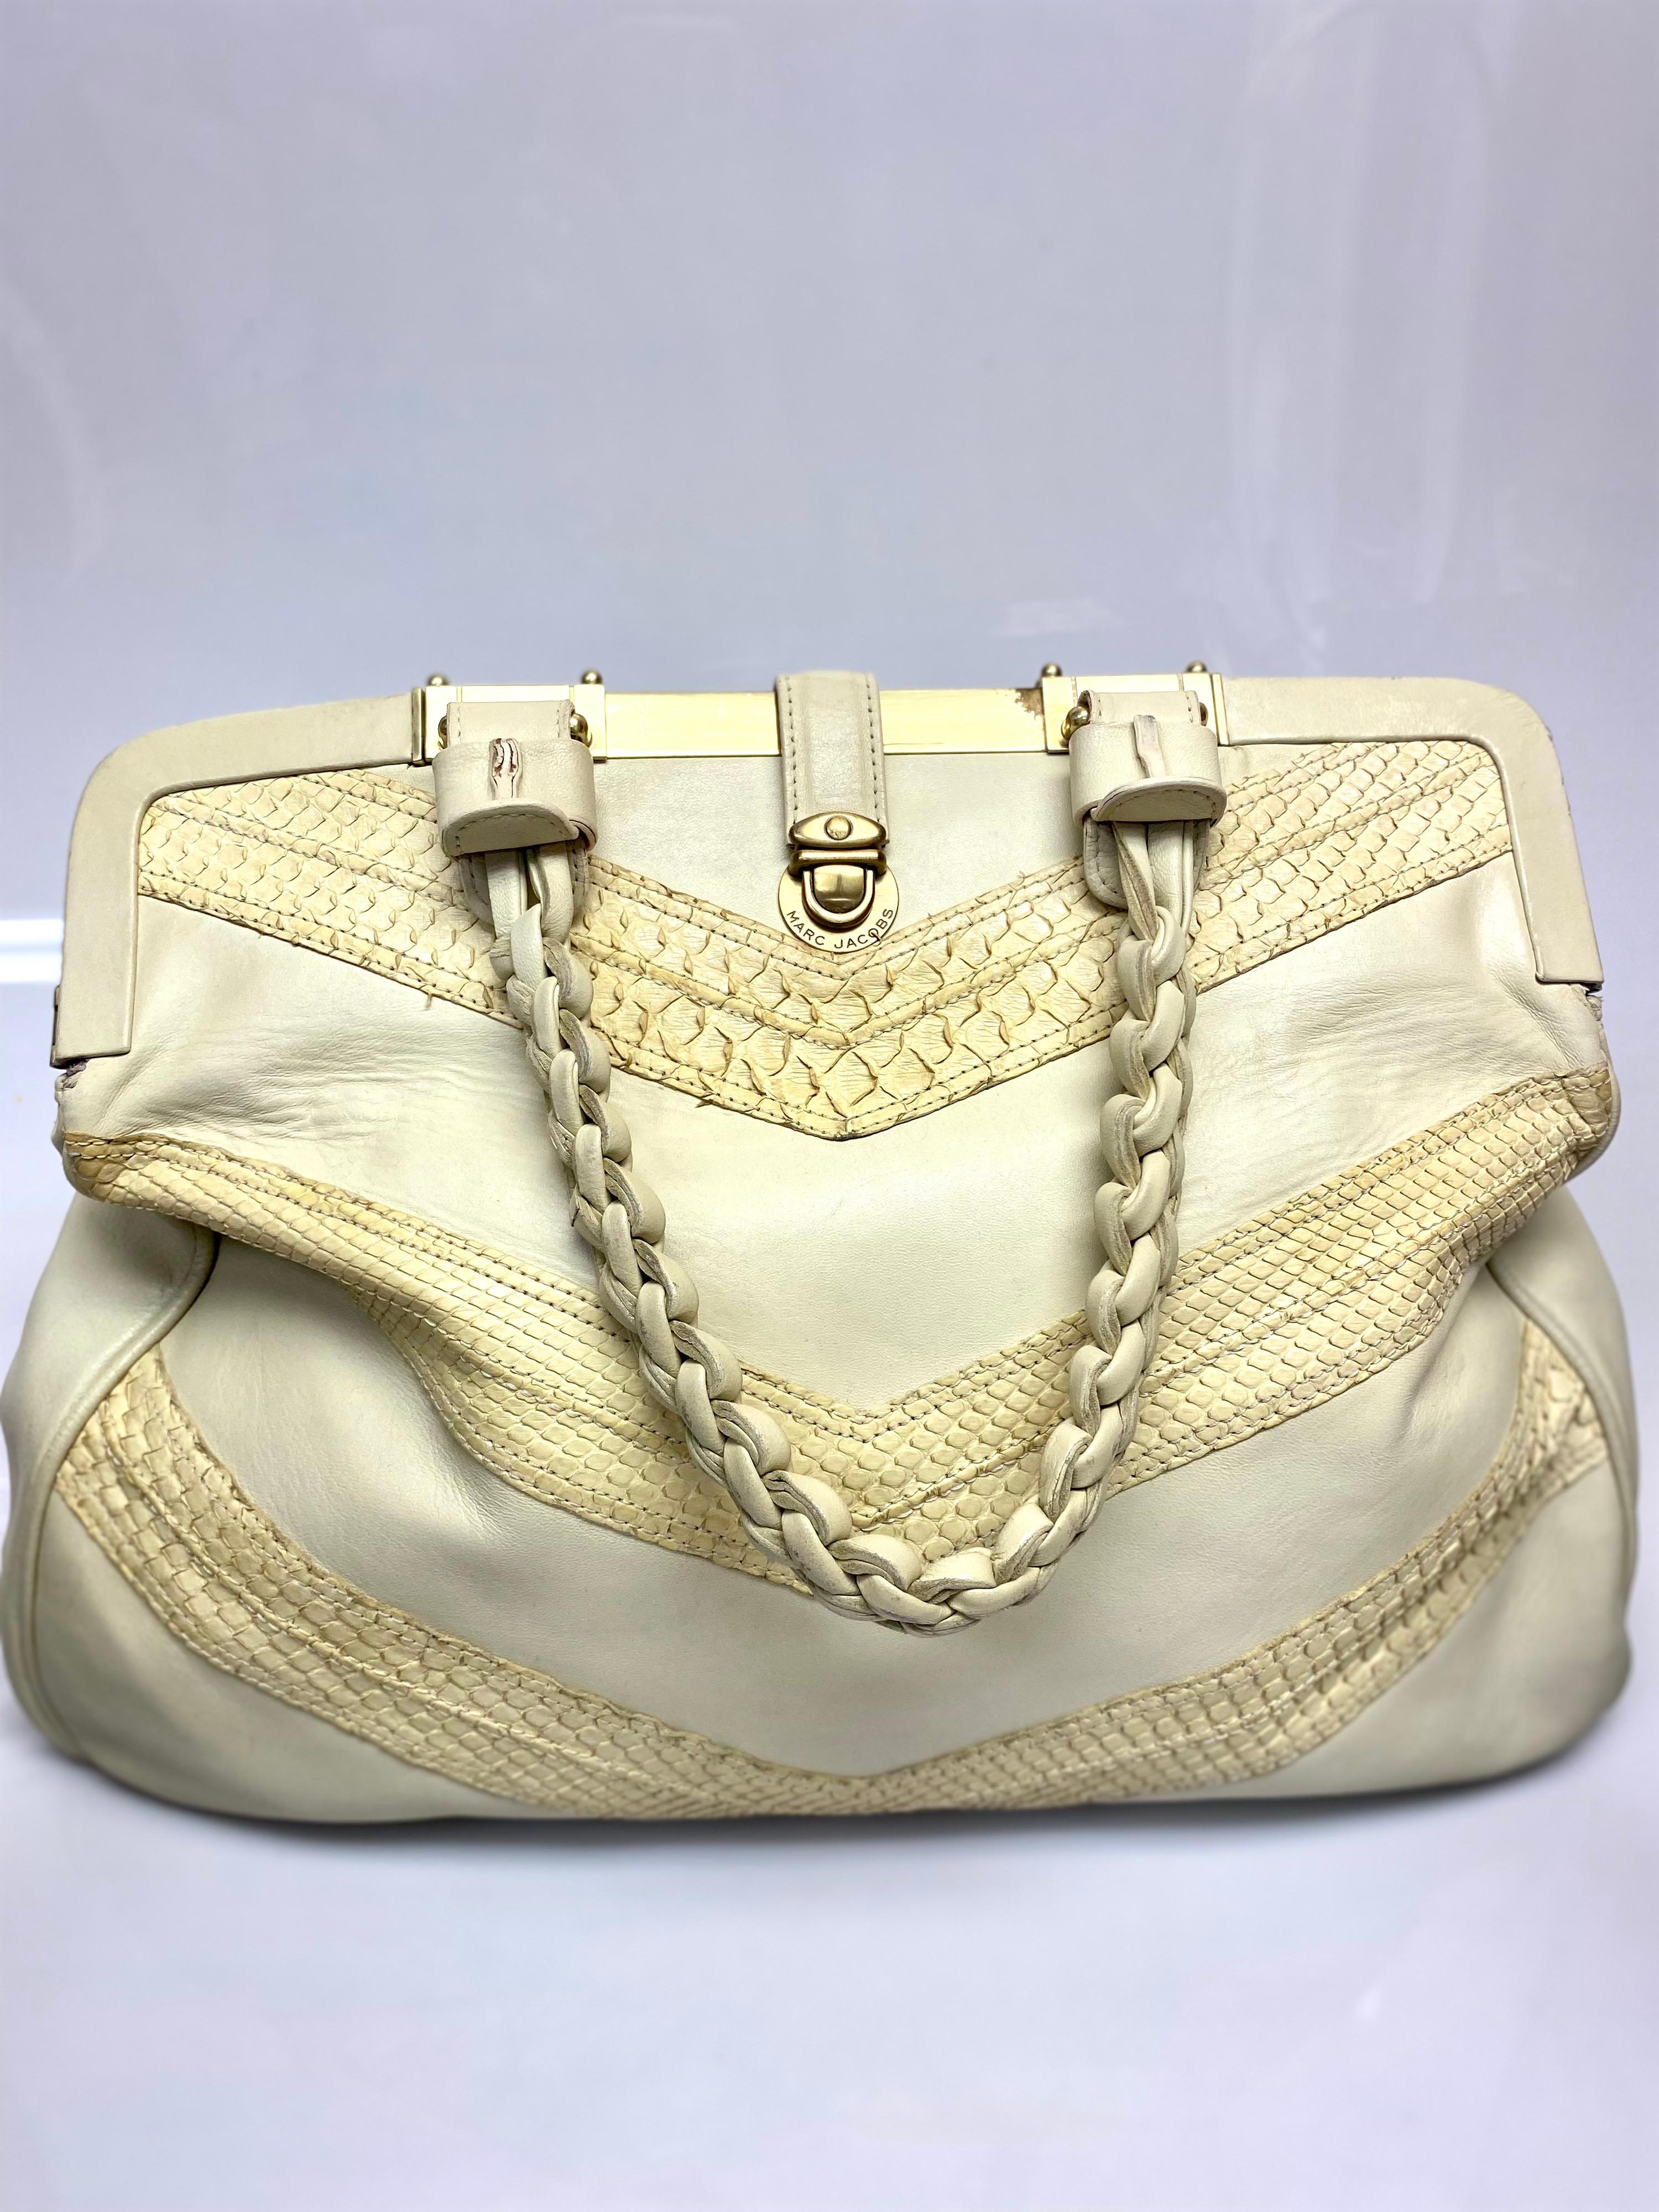 Marc Jacobs Beige Python Leather Handbag In Good Condition For Sale In West Palm Beach, FL